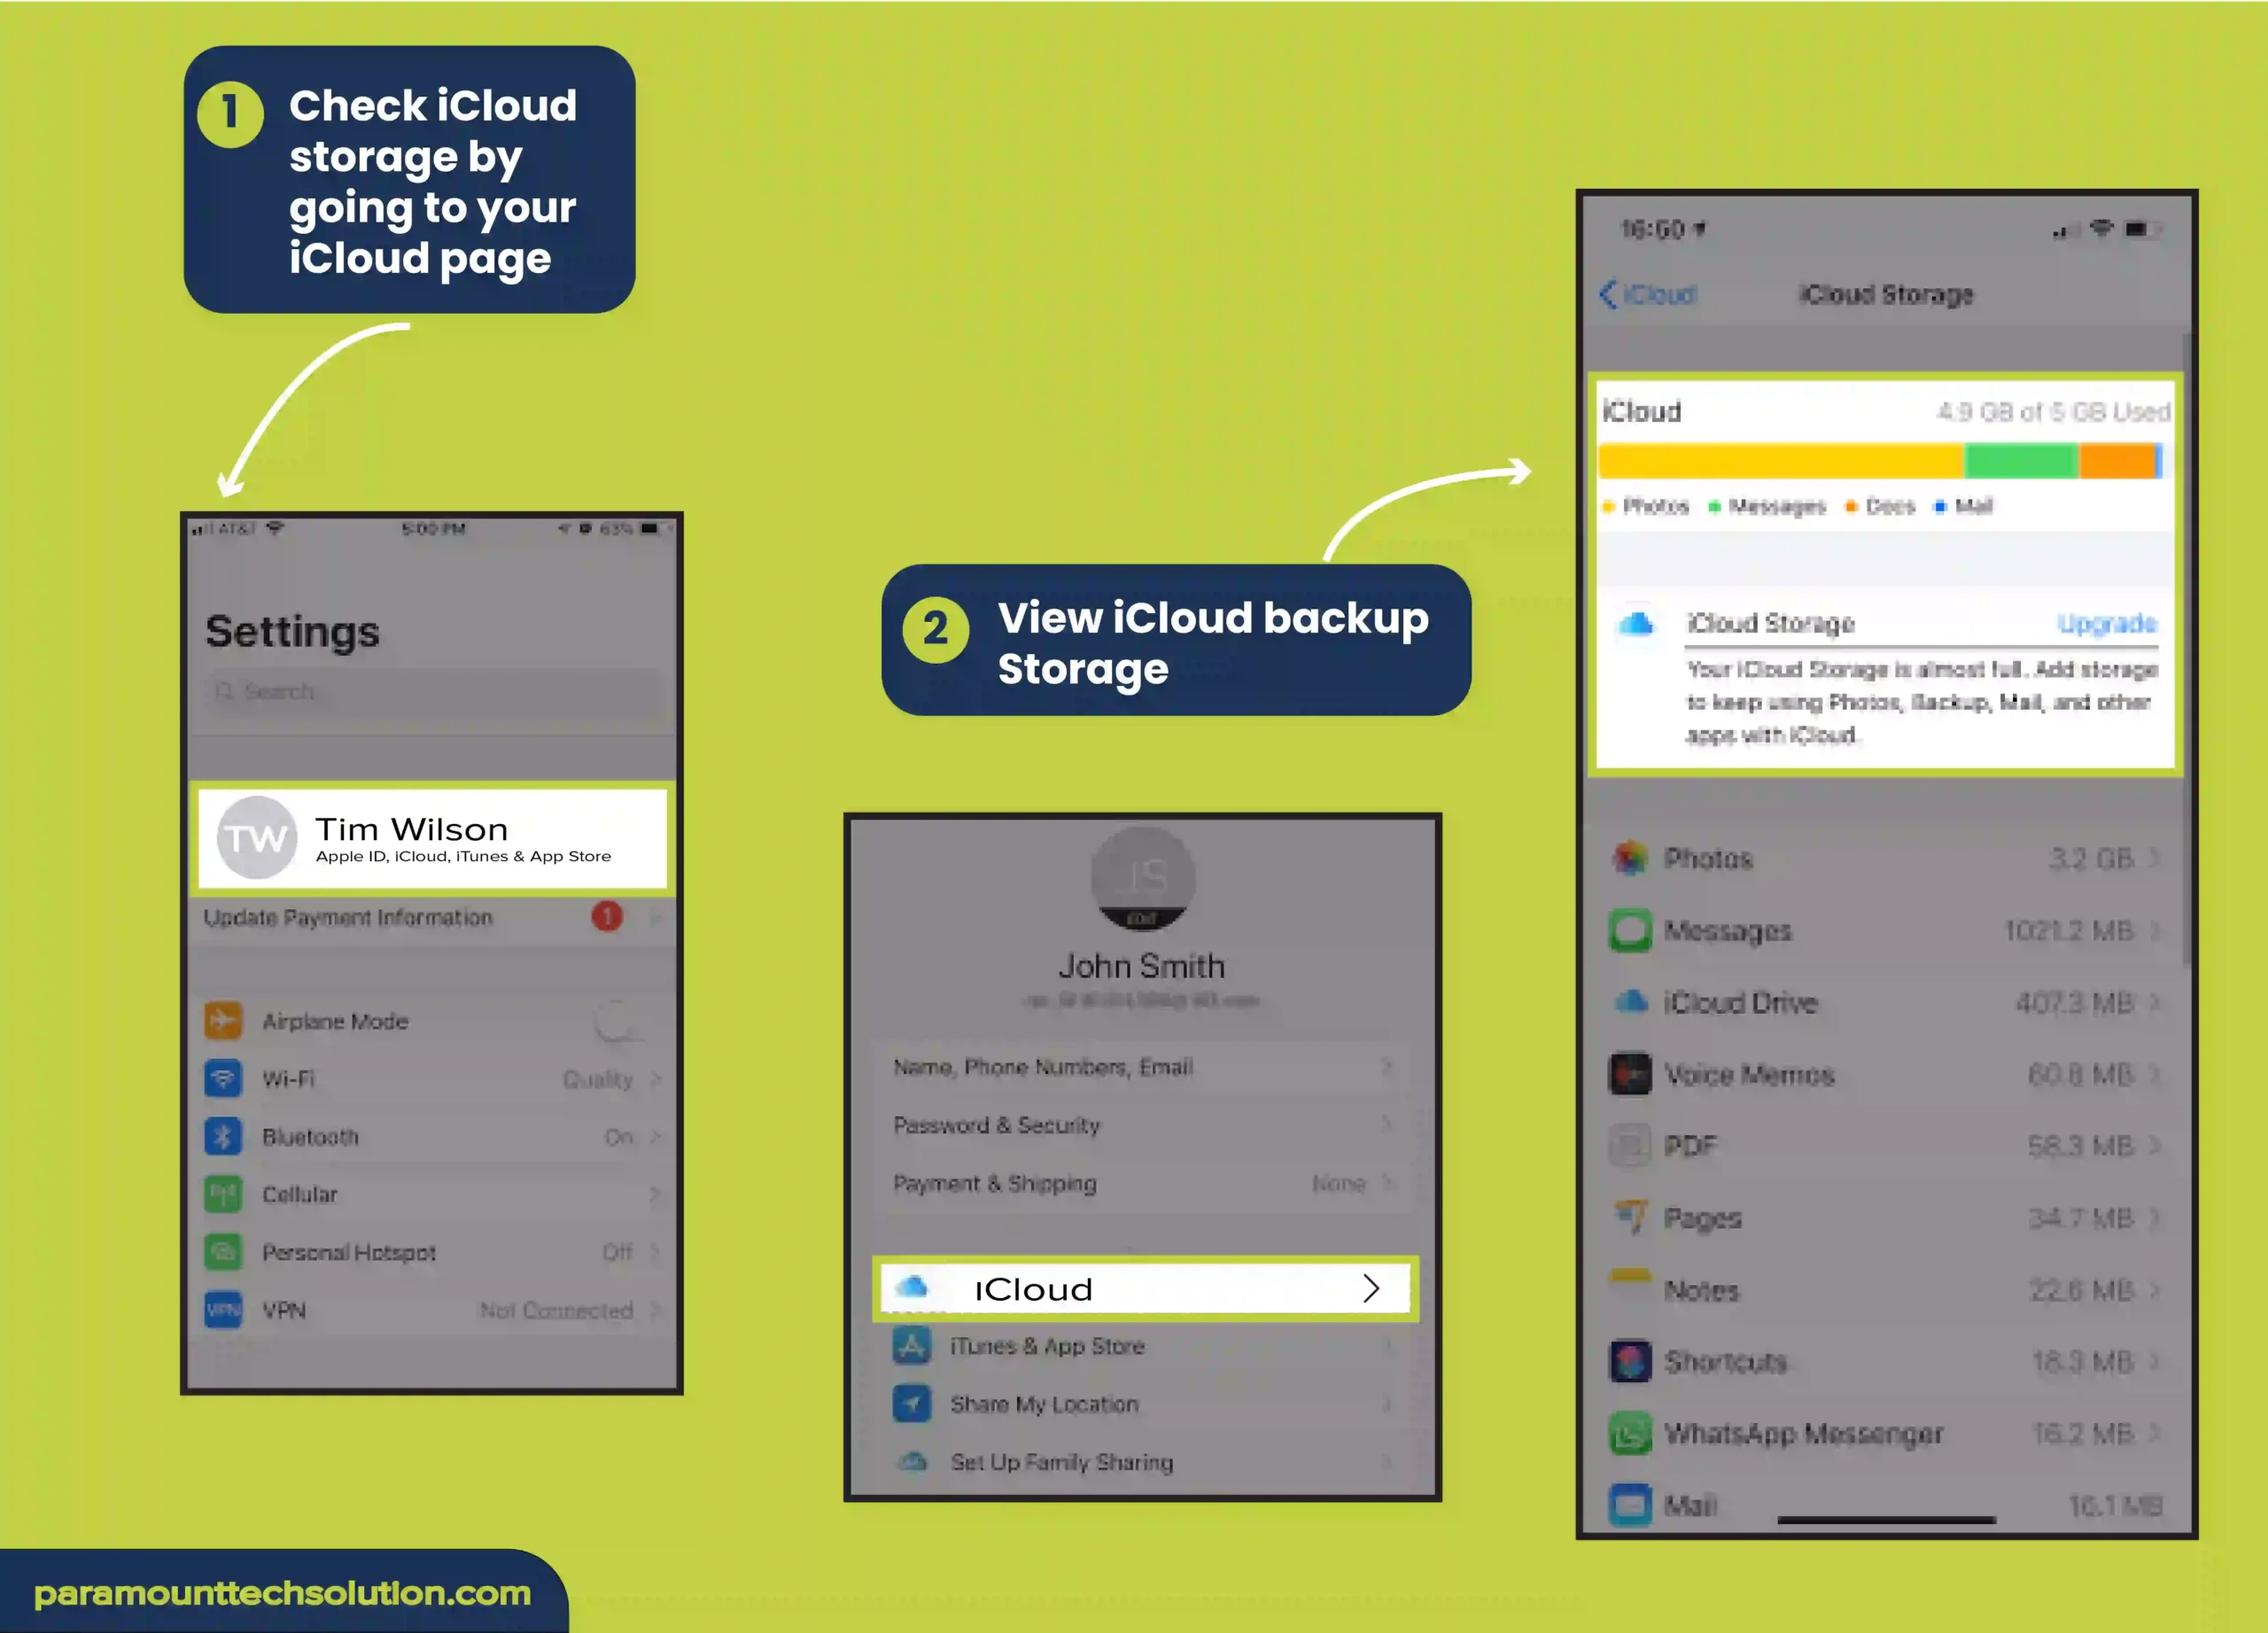 How much iCloud storage is needed for a backup Check iCloud storage and view iCloud backup